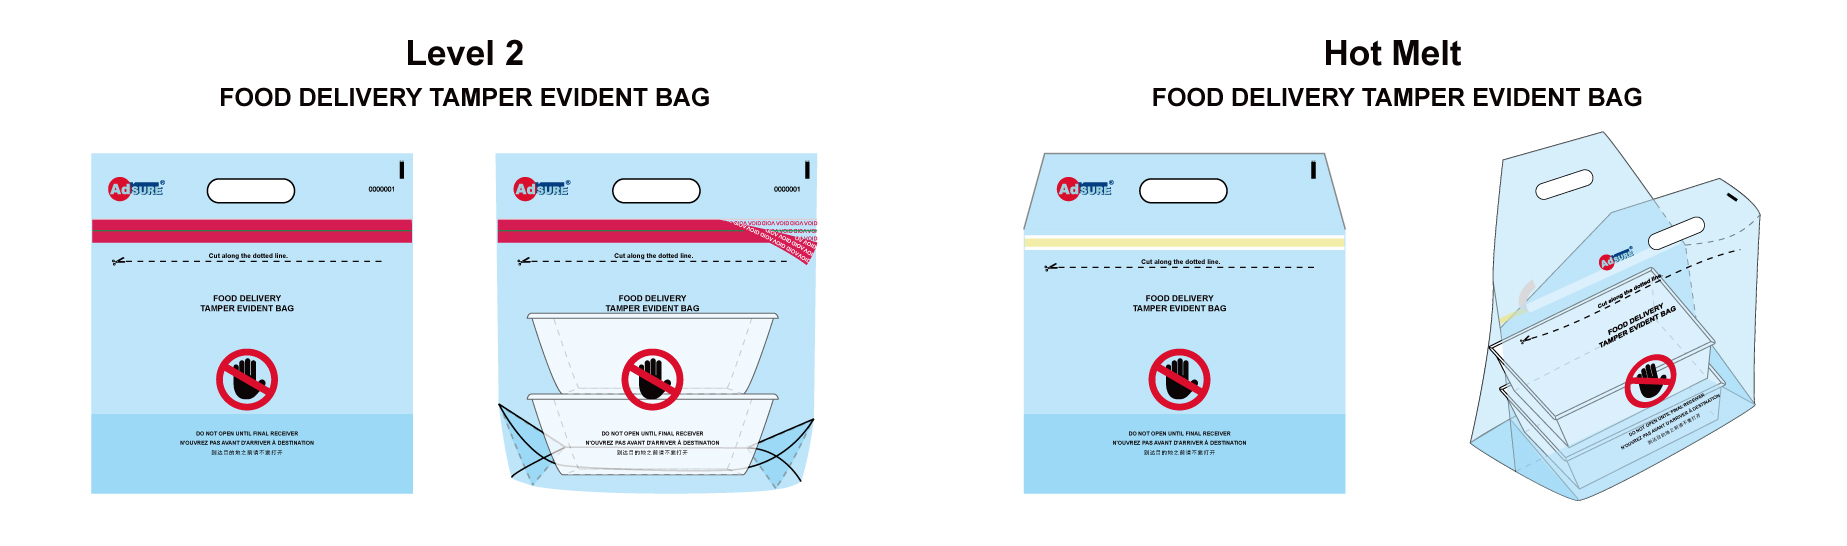 Tamper Evident Bags for Food Delivery and Restaurant